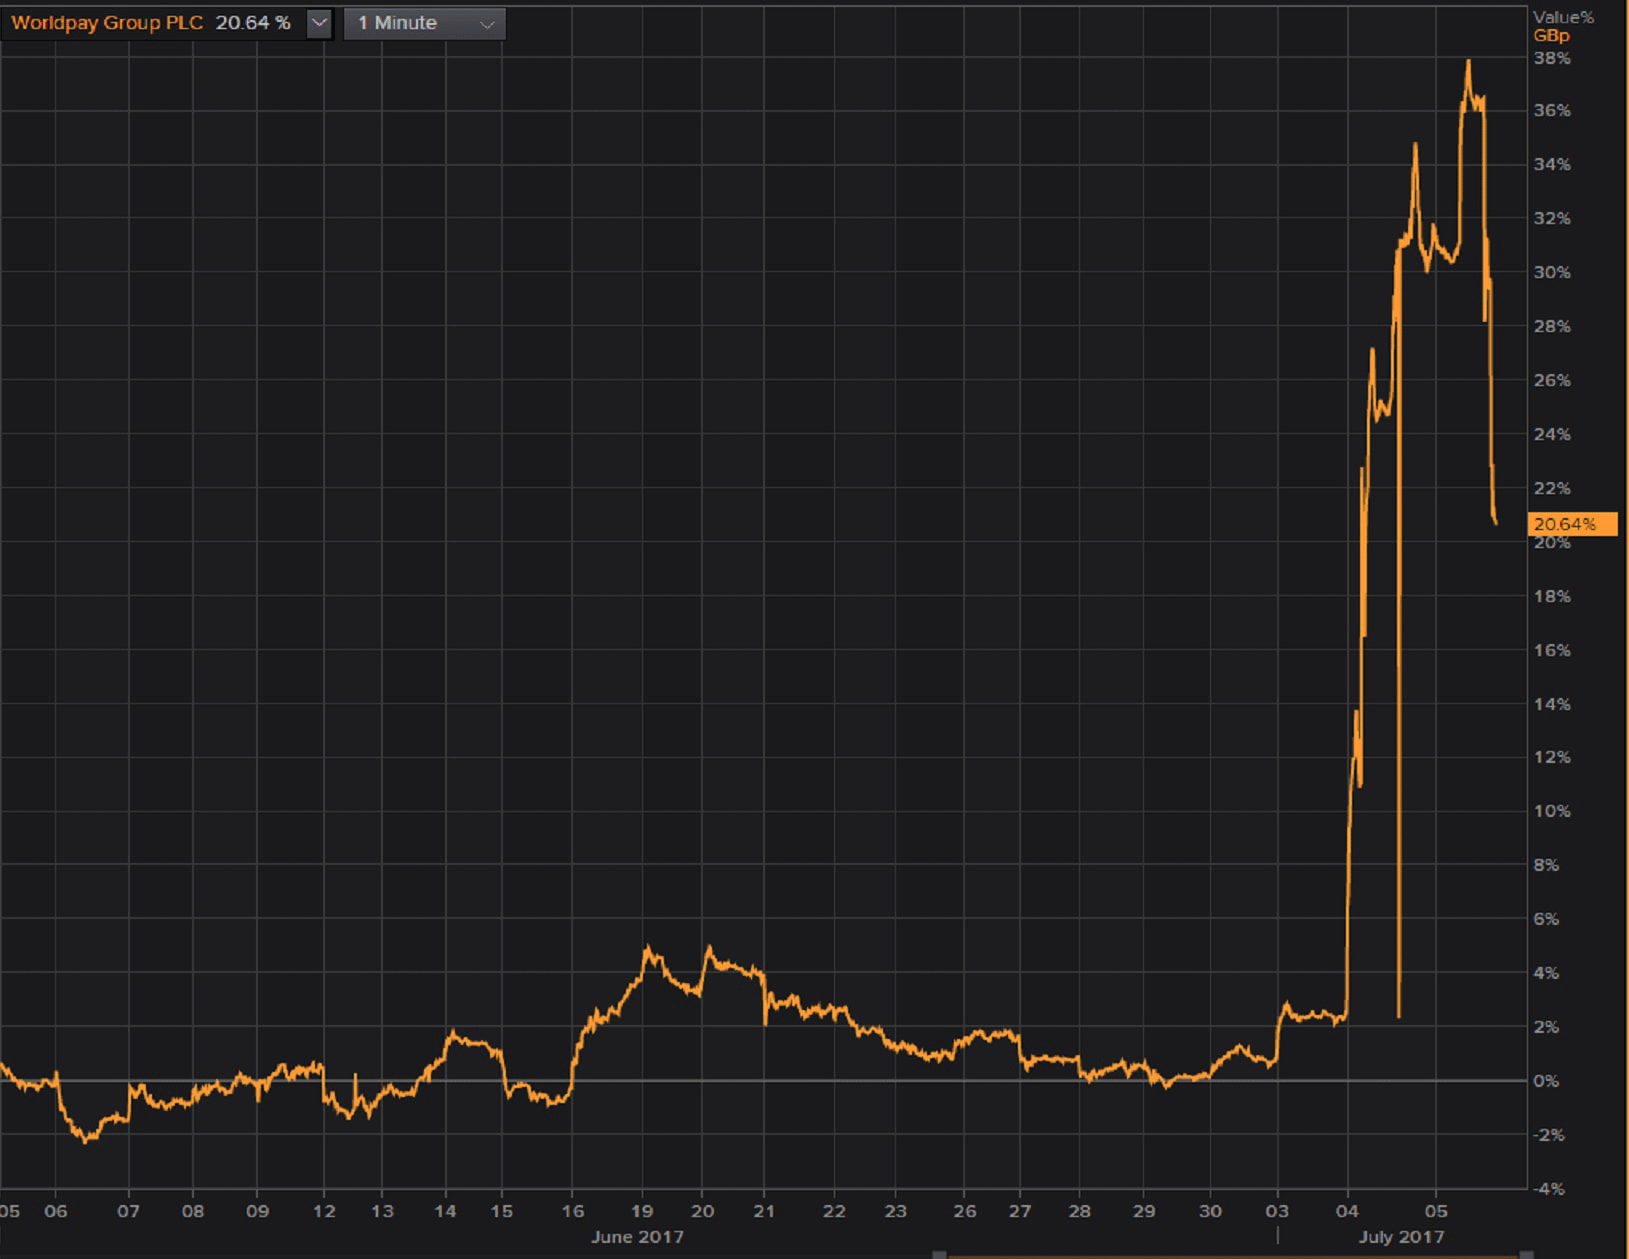 &#13;
Worldpay shares spiked after speculation mounted earlier this week that a takeover was being prepared &#13;